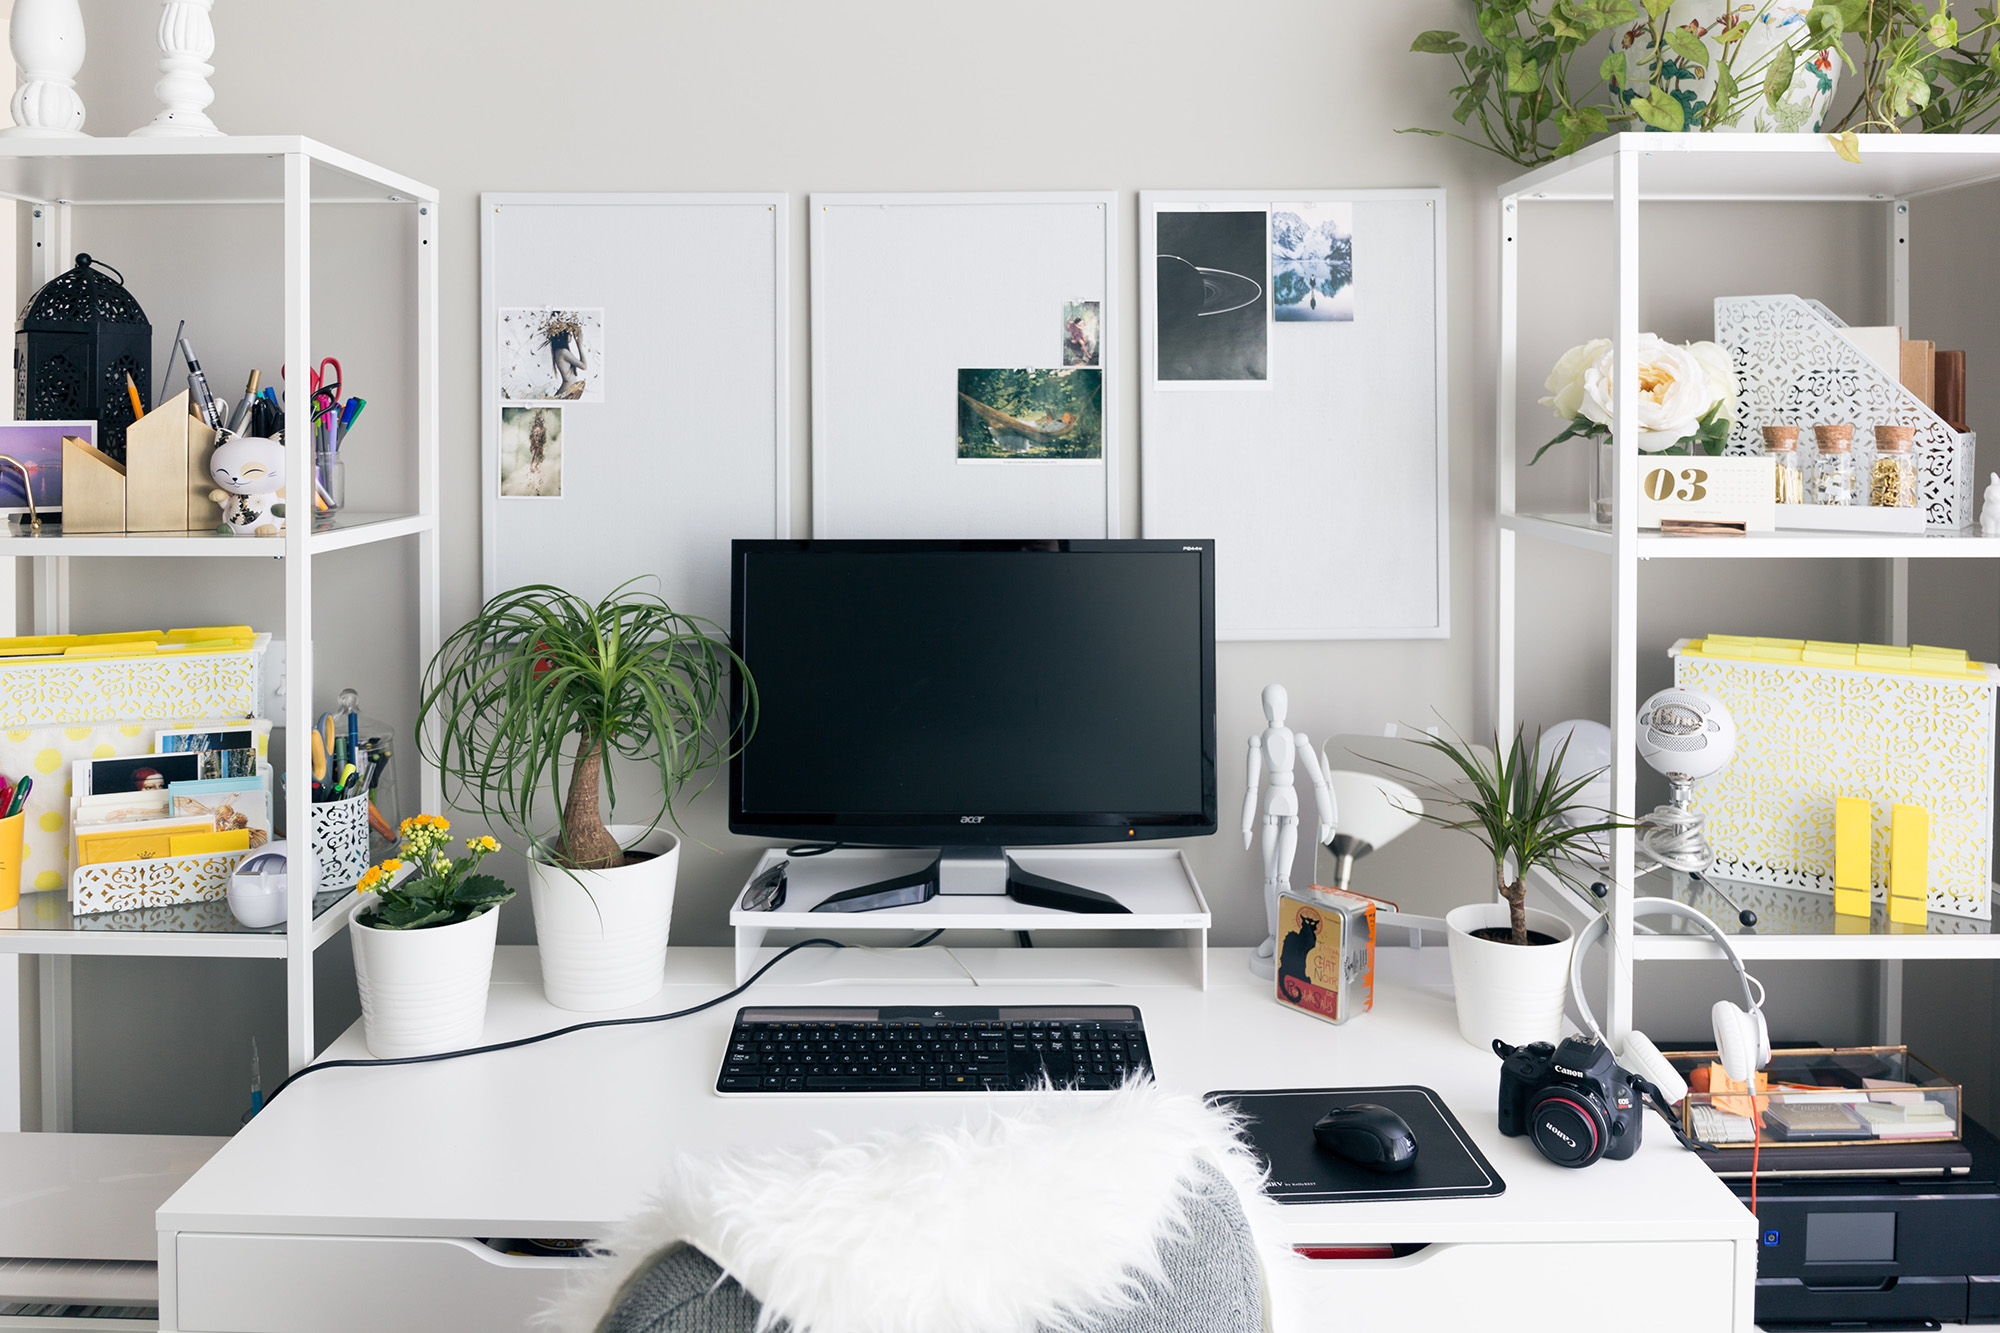 10 desk accessories to make your home office more efficient